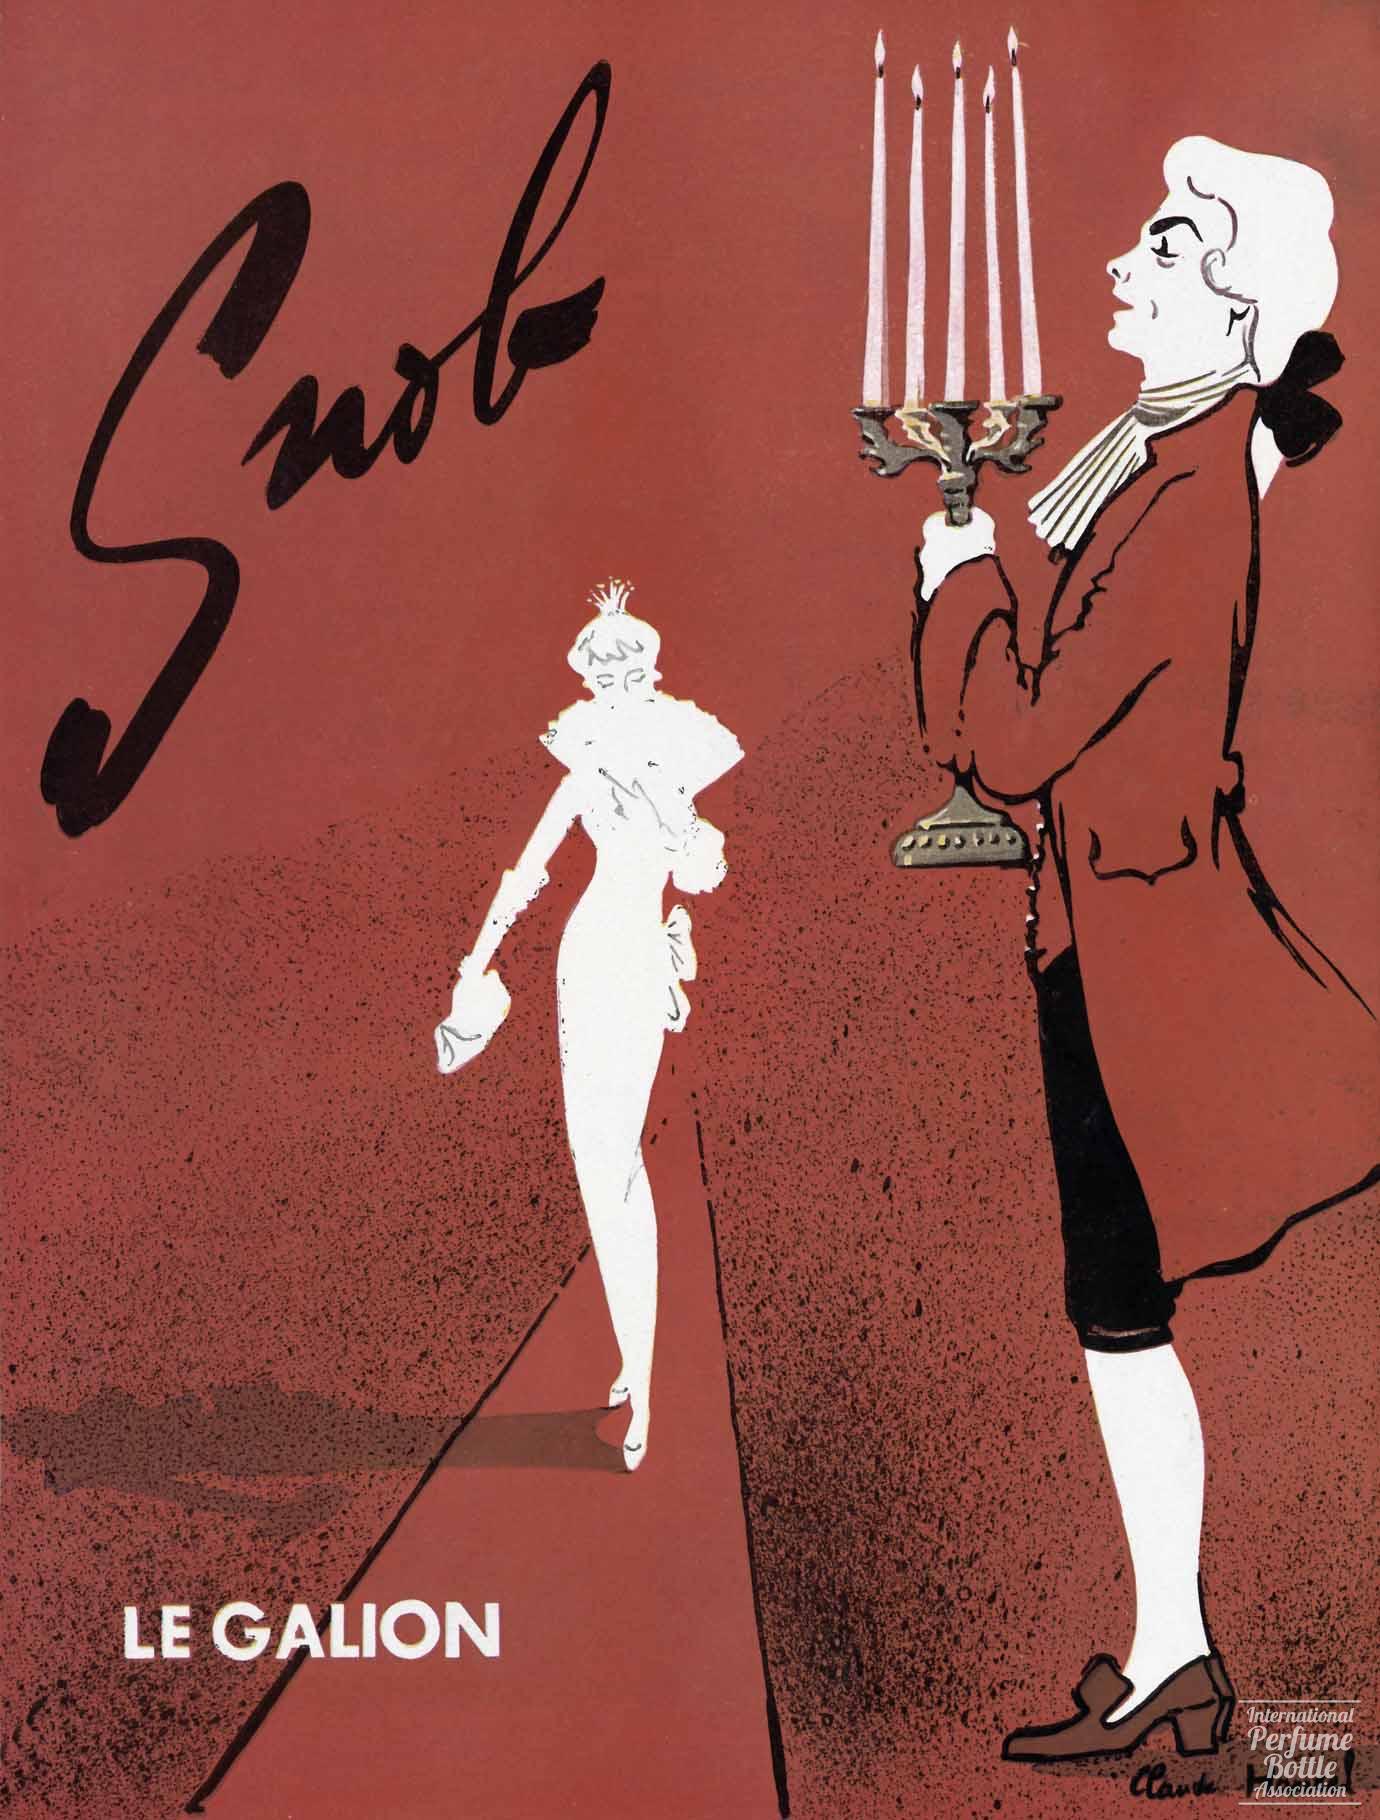 "Snob" by Le Galion Advertisement - 1957